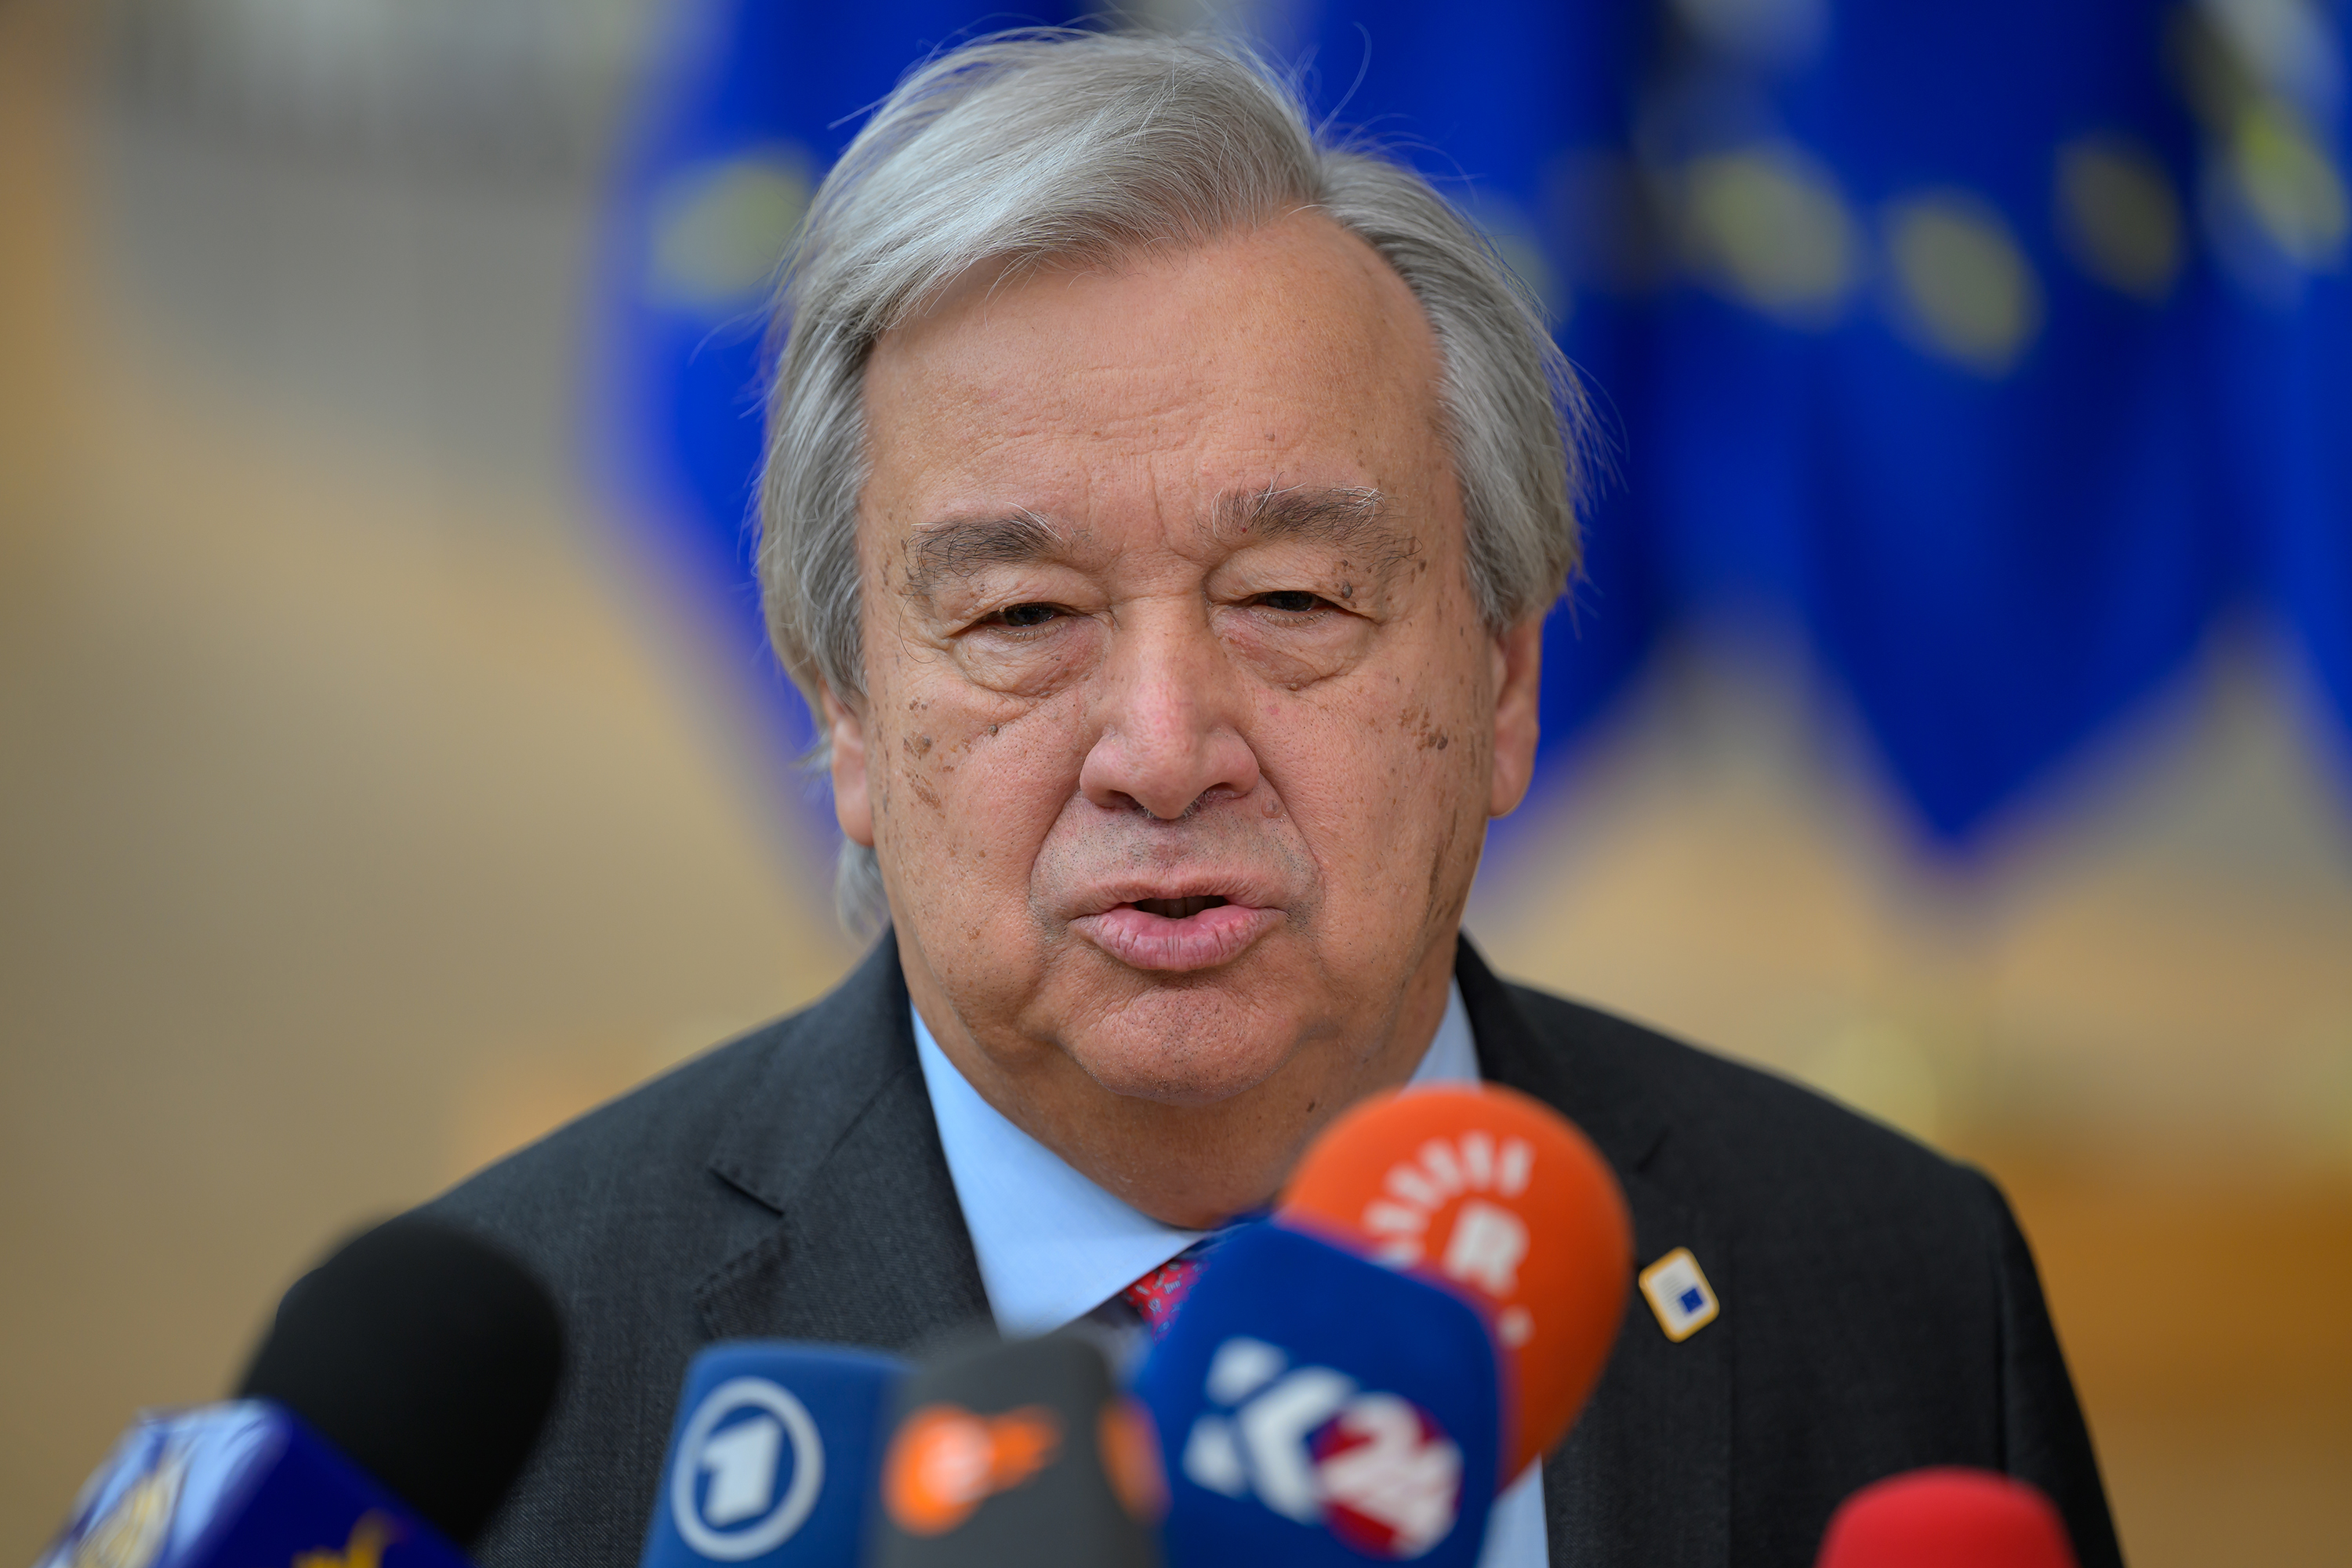 United Nations Secretary-General Antonio Guterres speaks to the press in Brussels, Belgium, on March 21.